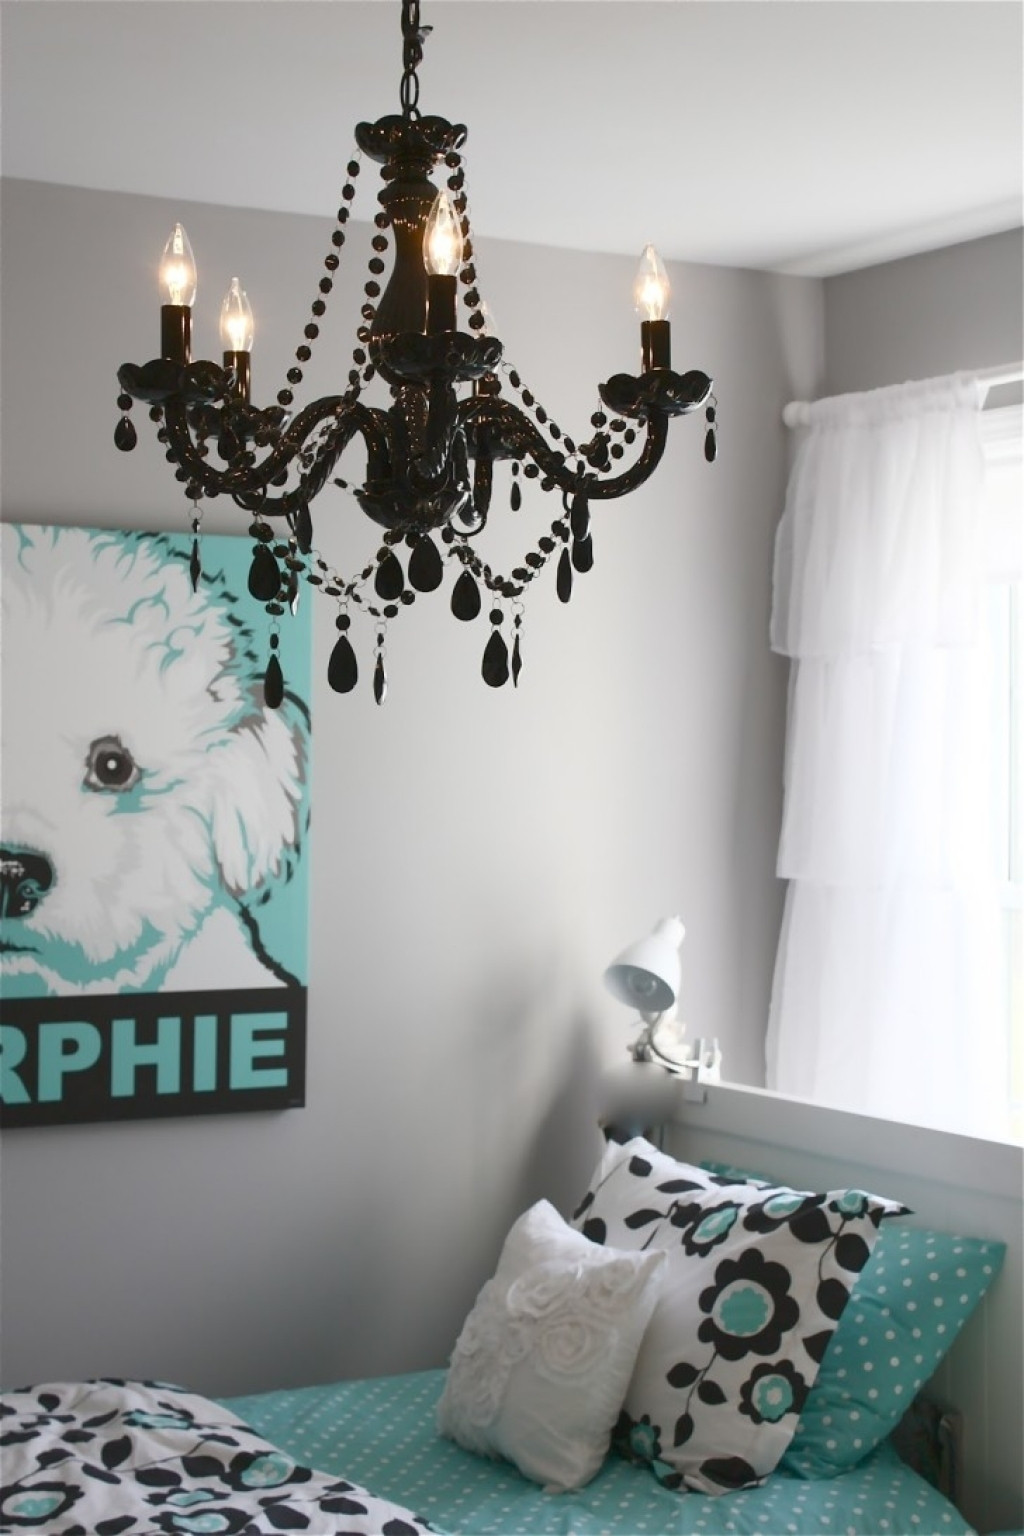 Small Bedroom Chandelier
 25 Best Collection of Small White Chandeliers